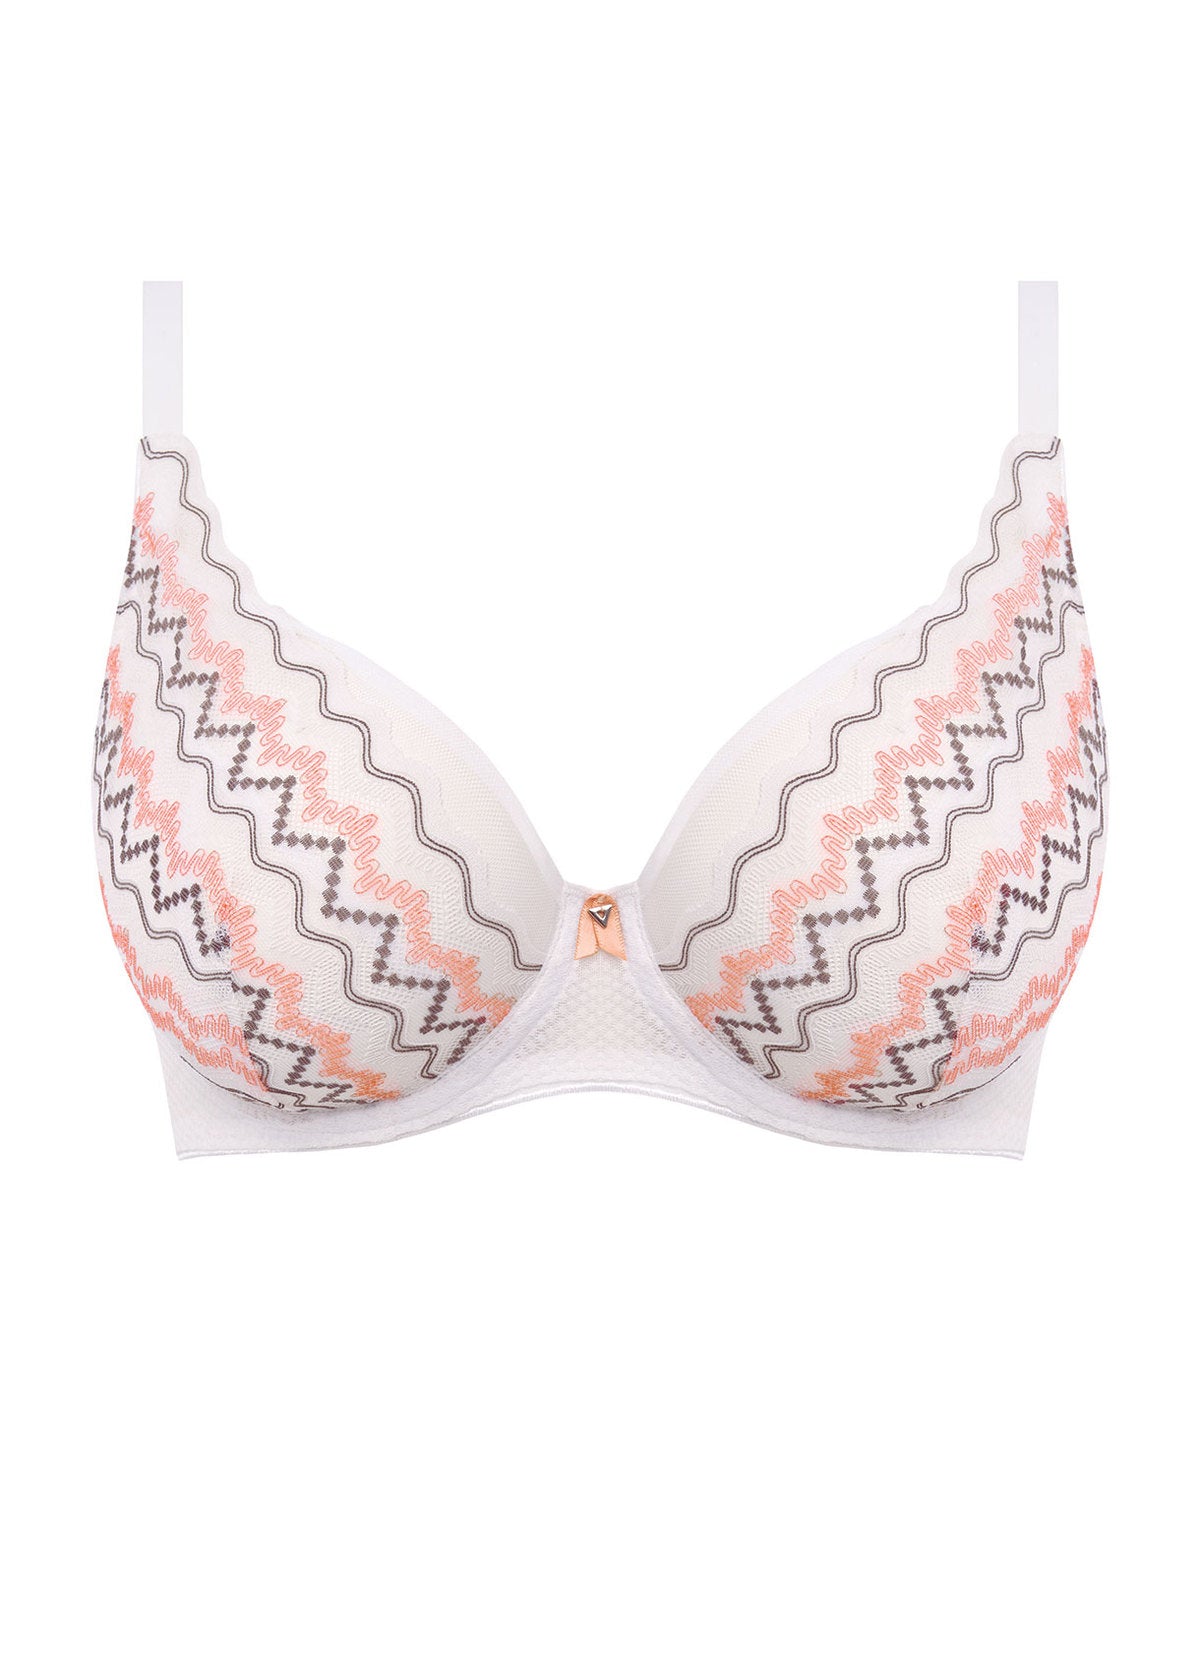 Figleaves Pulse Lace Underwired Bra 754850 - Helia Beer Co